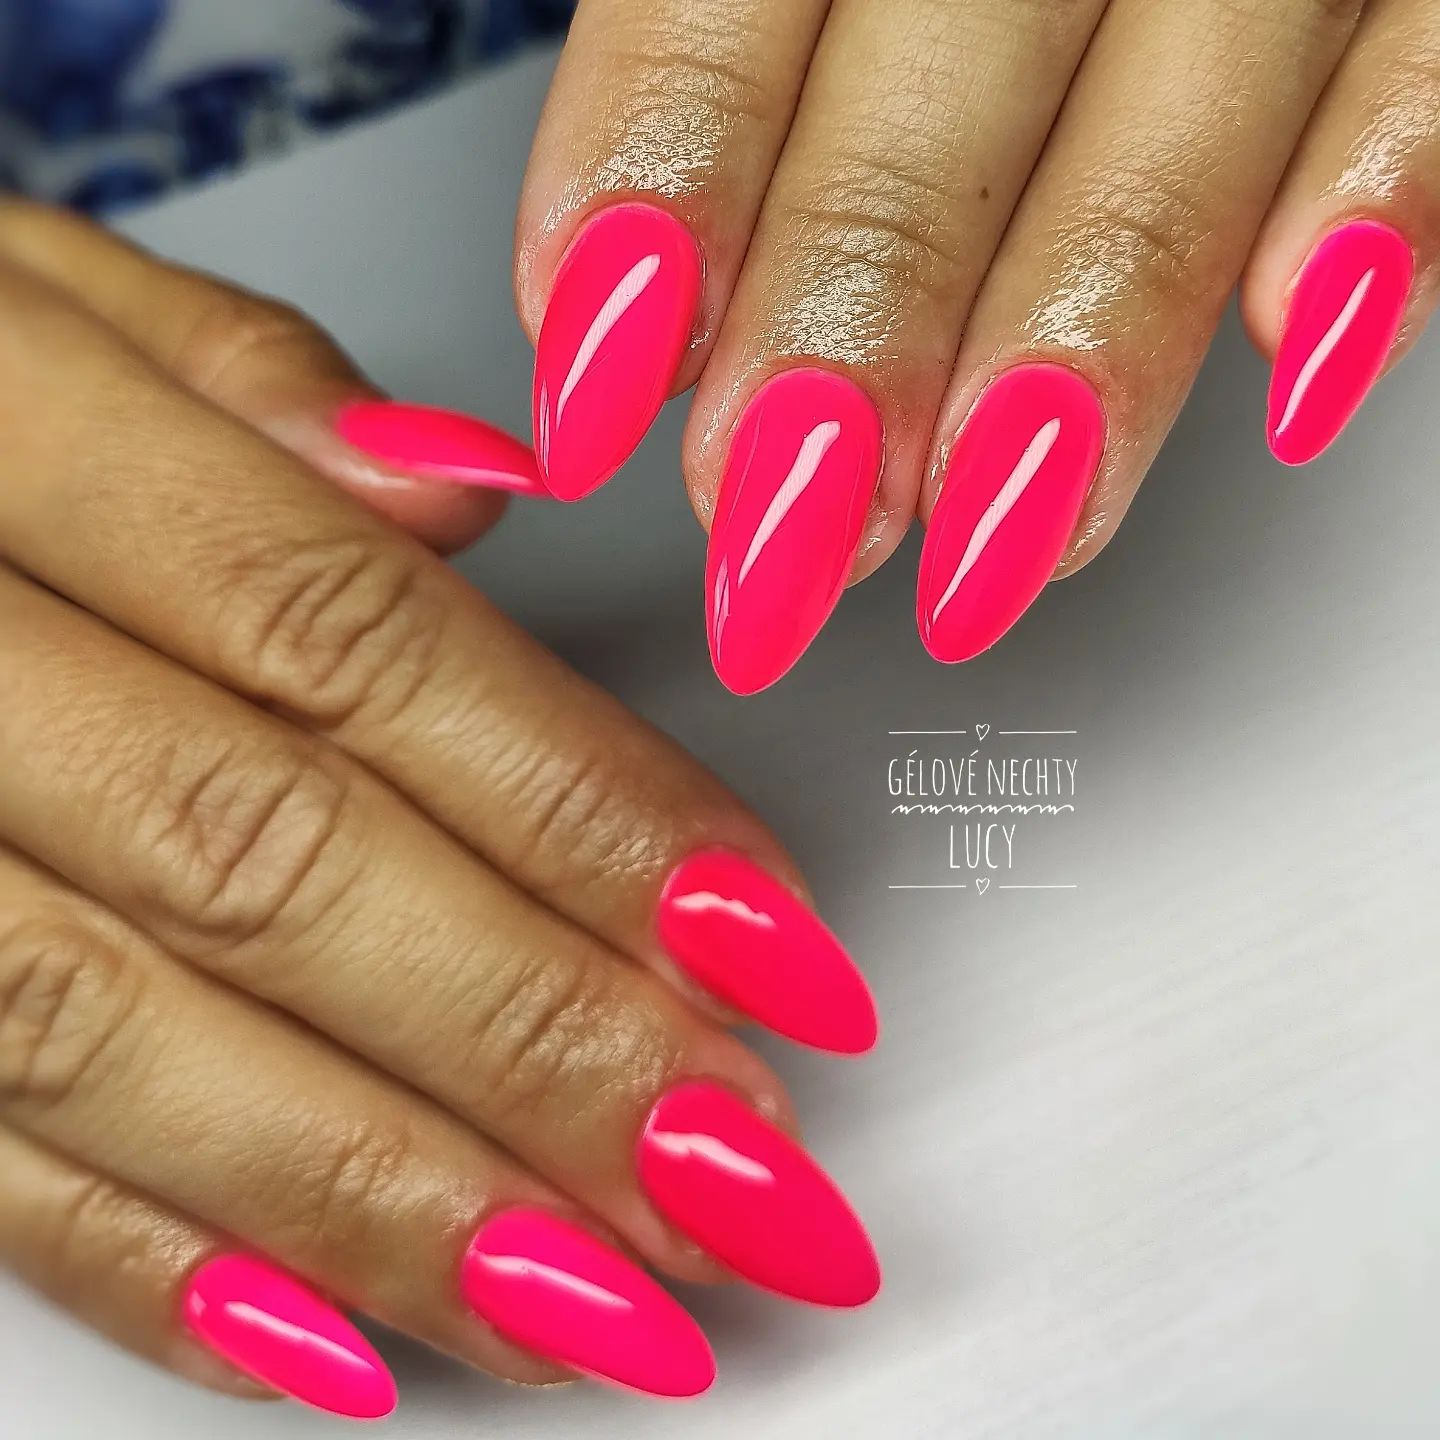 Neon colors are the most favorite nail polishes in summer, aren't they? Your long almond nails will be amazing with neon pink color.